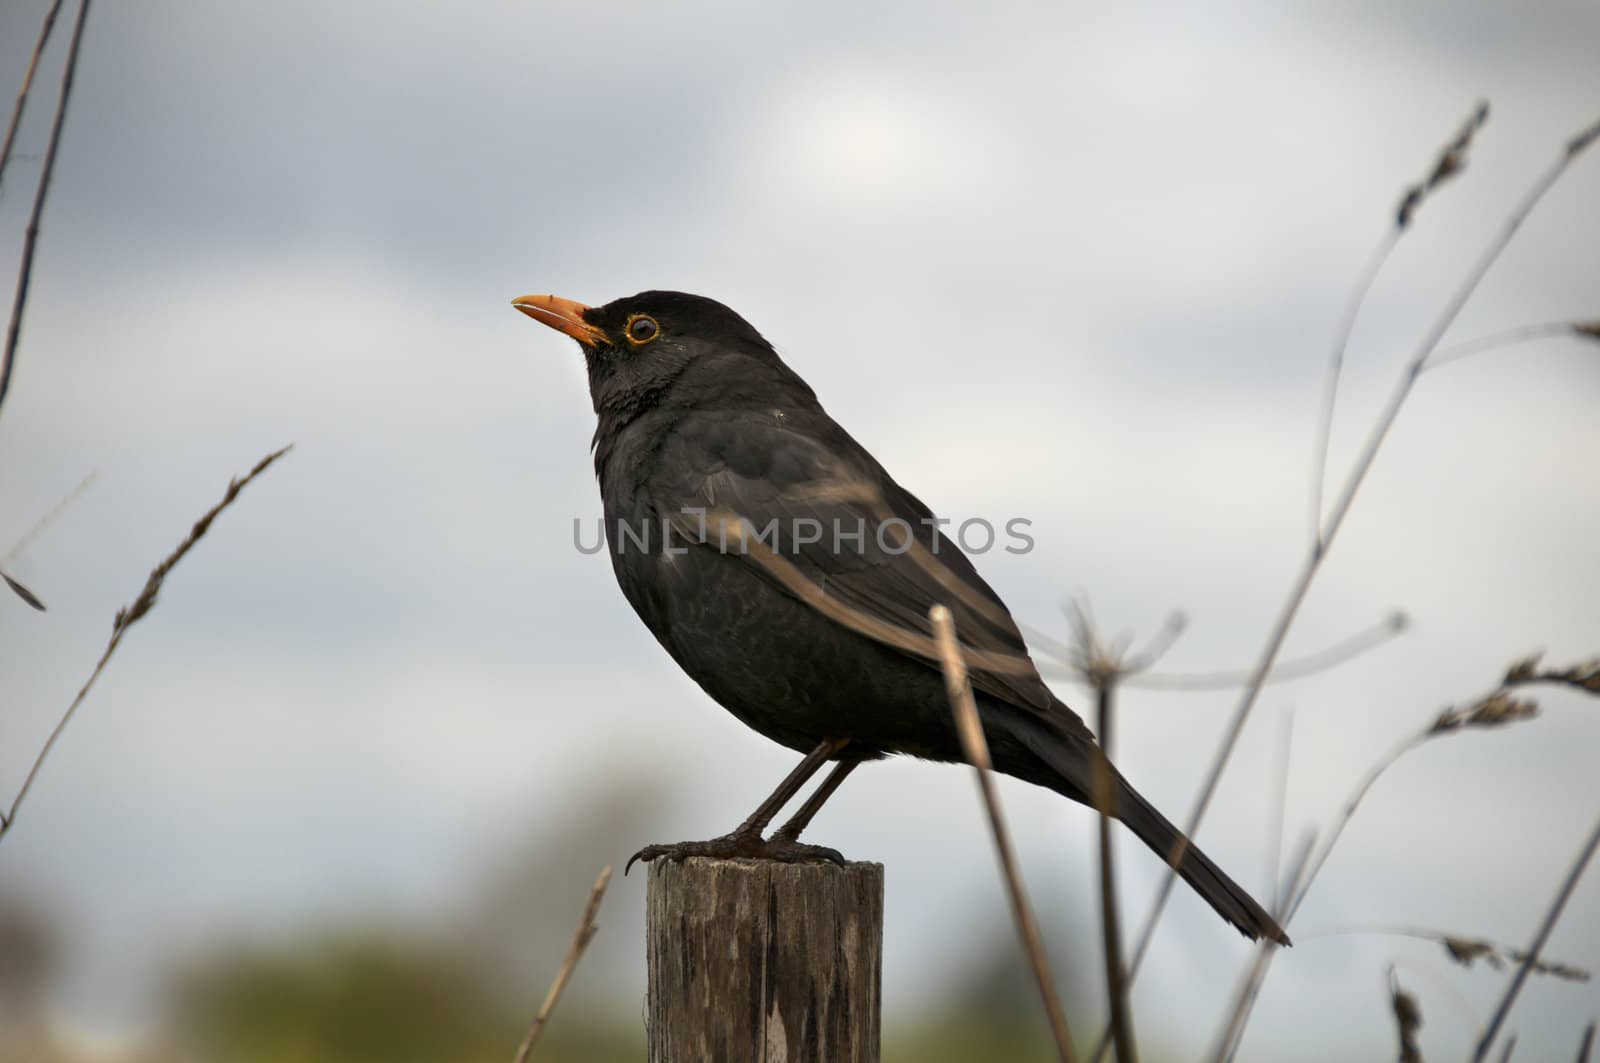 A bird sitting on a fence post with a cloudy sky in the background